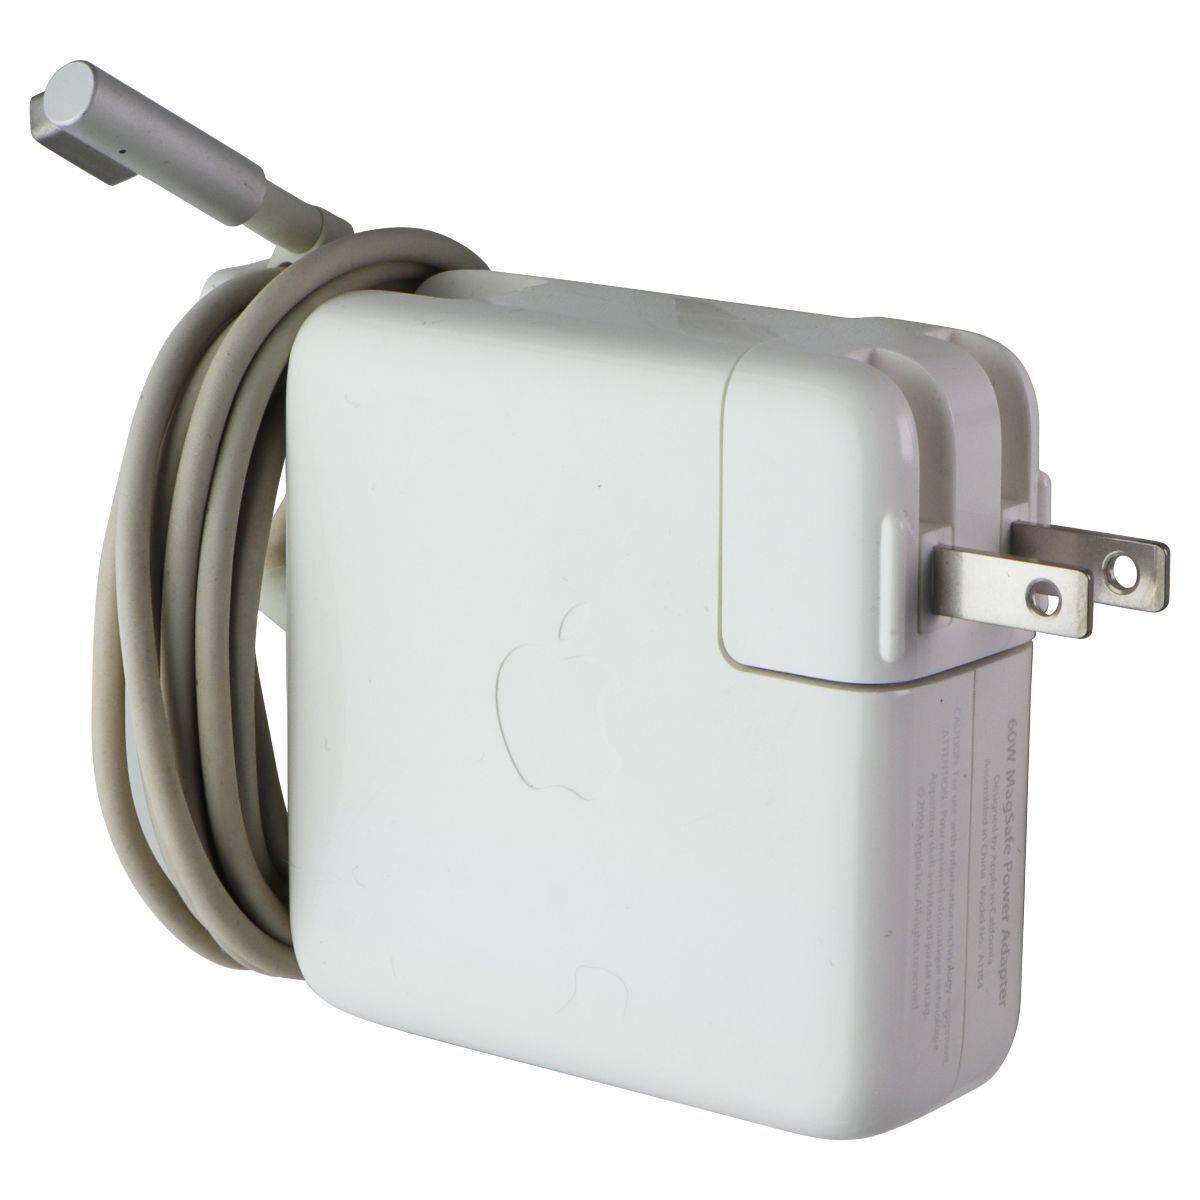 Apple (60W) L-Tip MagSafe Power Adapter (A1184) - White (FOLDING PLUG ONLY)